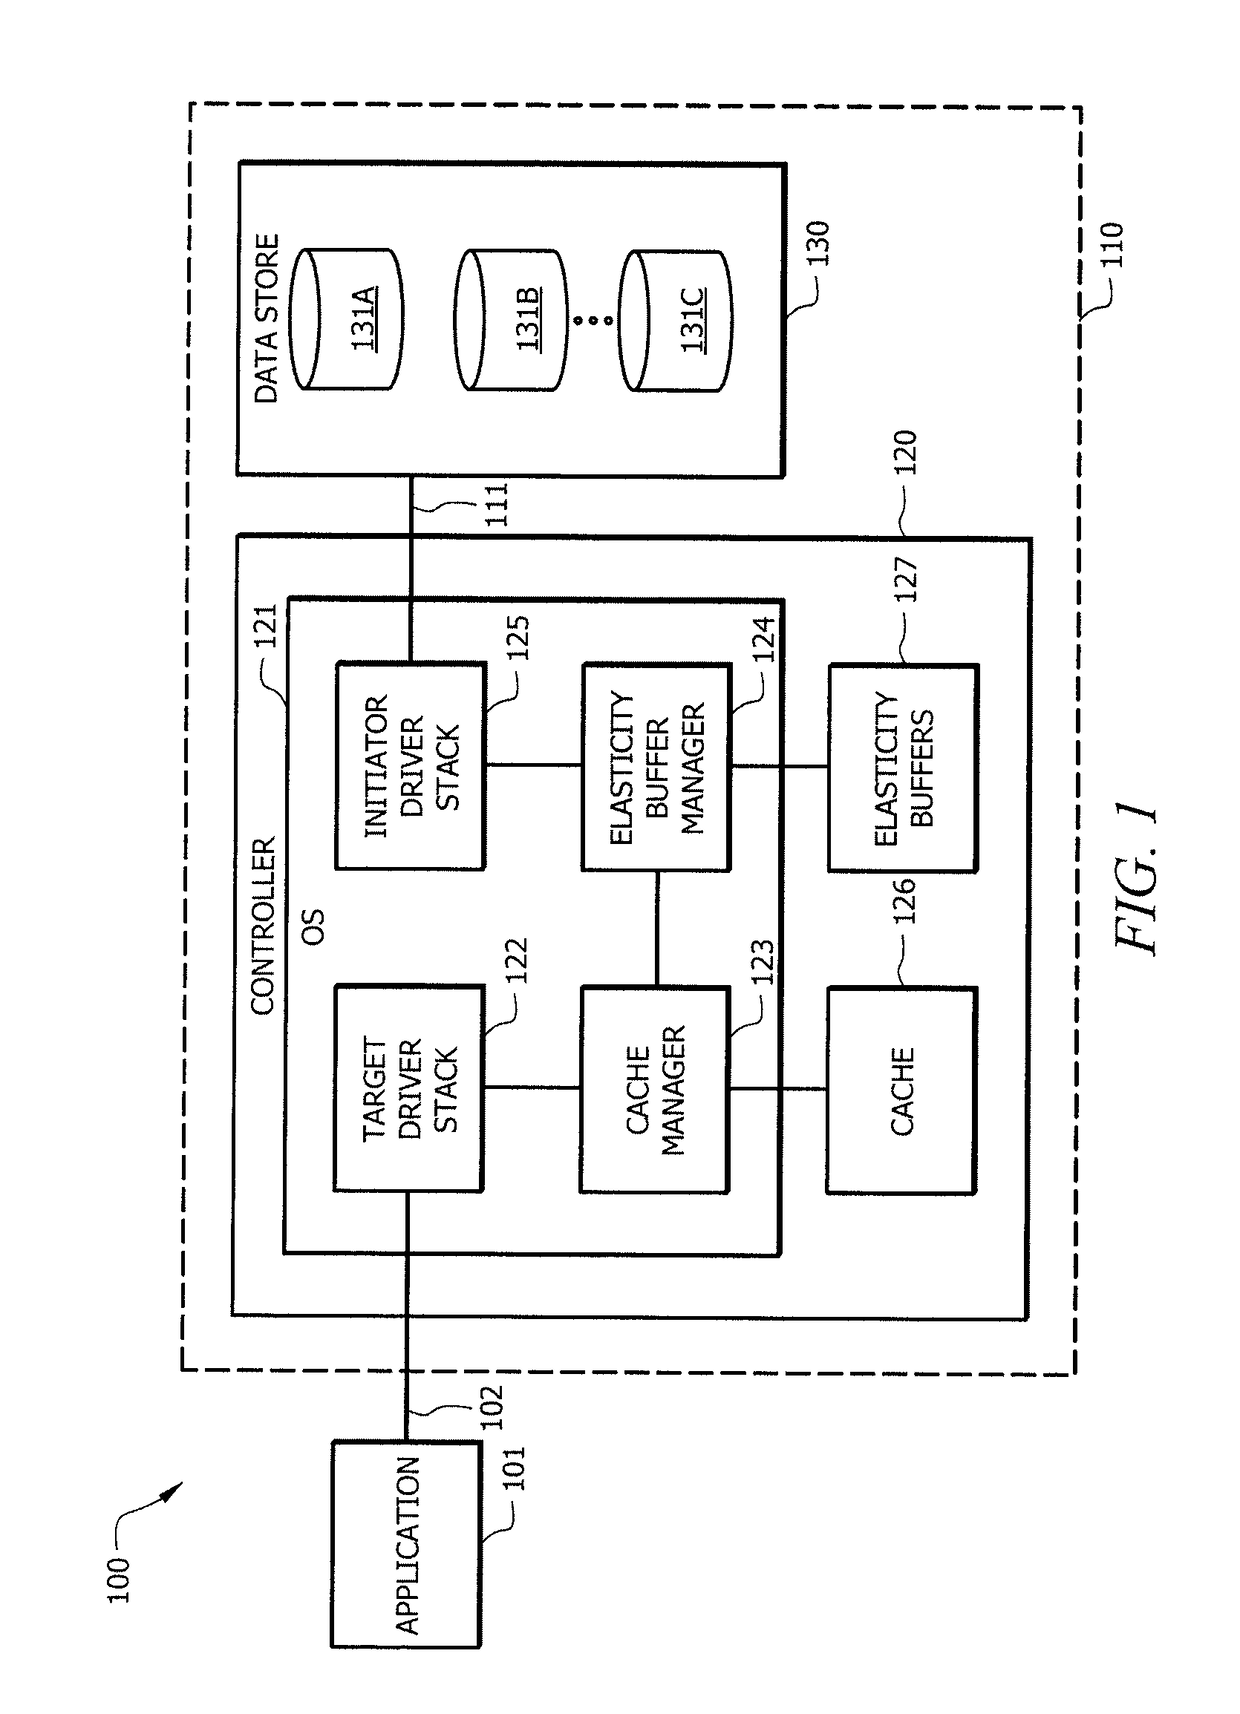 Systems and methods providing storage system write elasticity buffers